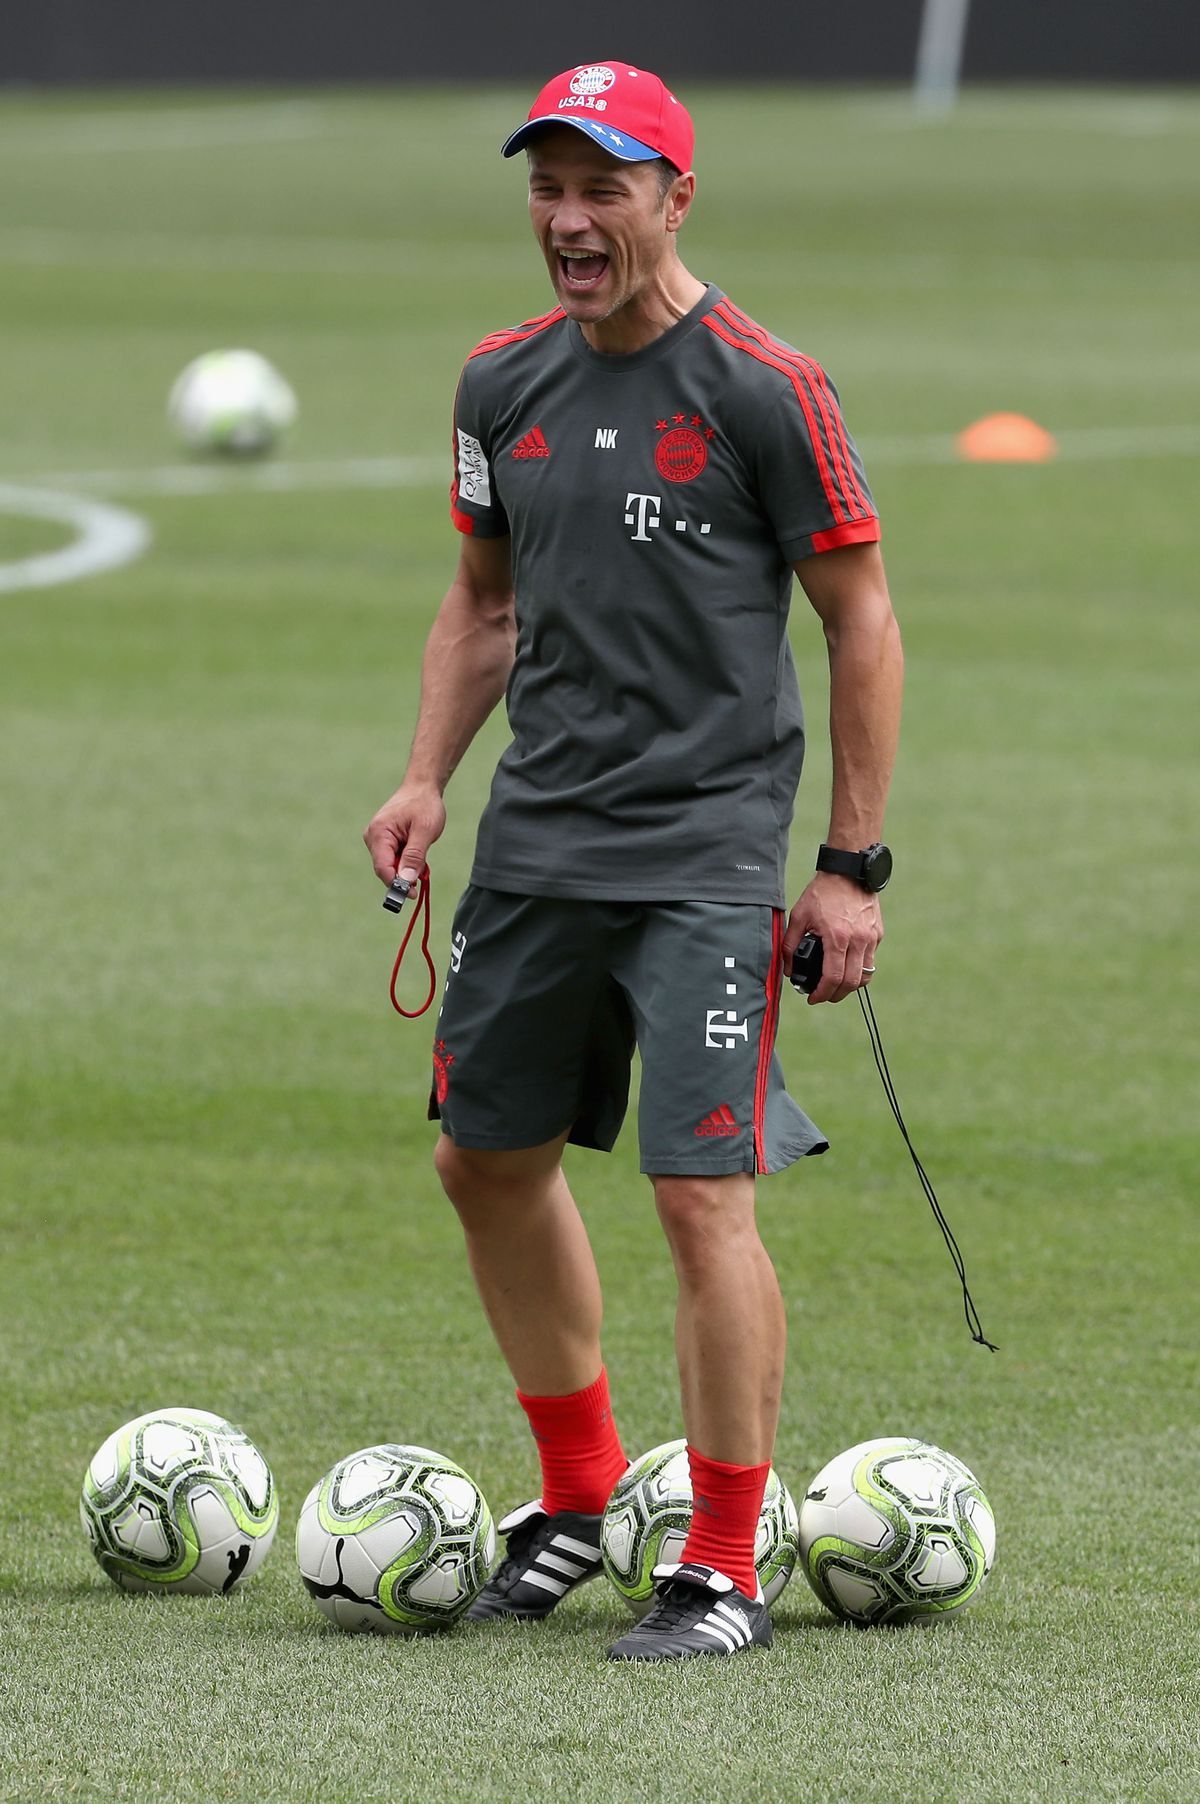 FC Bayern AUDI Summer Tour 2018 - Day 2
PHILADELPHIA, PA - JULY 24: Team coach Niko Kovac of FC Bayern Muenchen reacts during a training session on the second day of their FC Bayern AUDI Summer tour 2018 on July 24, 2018 in Philadelphia, Pennsylvania.